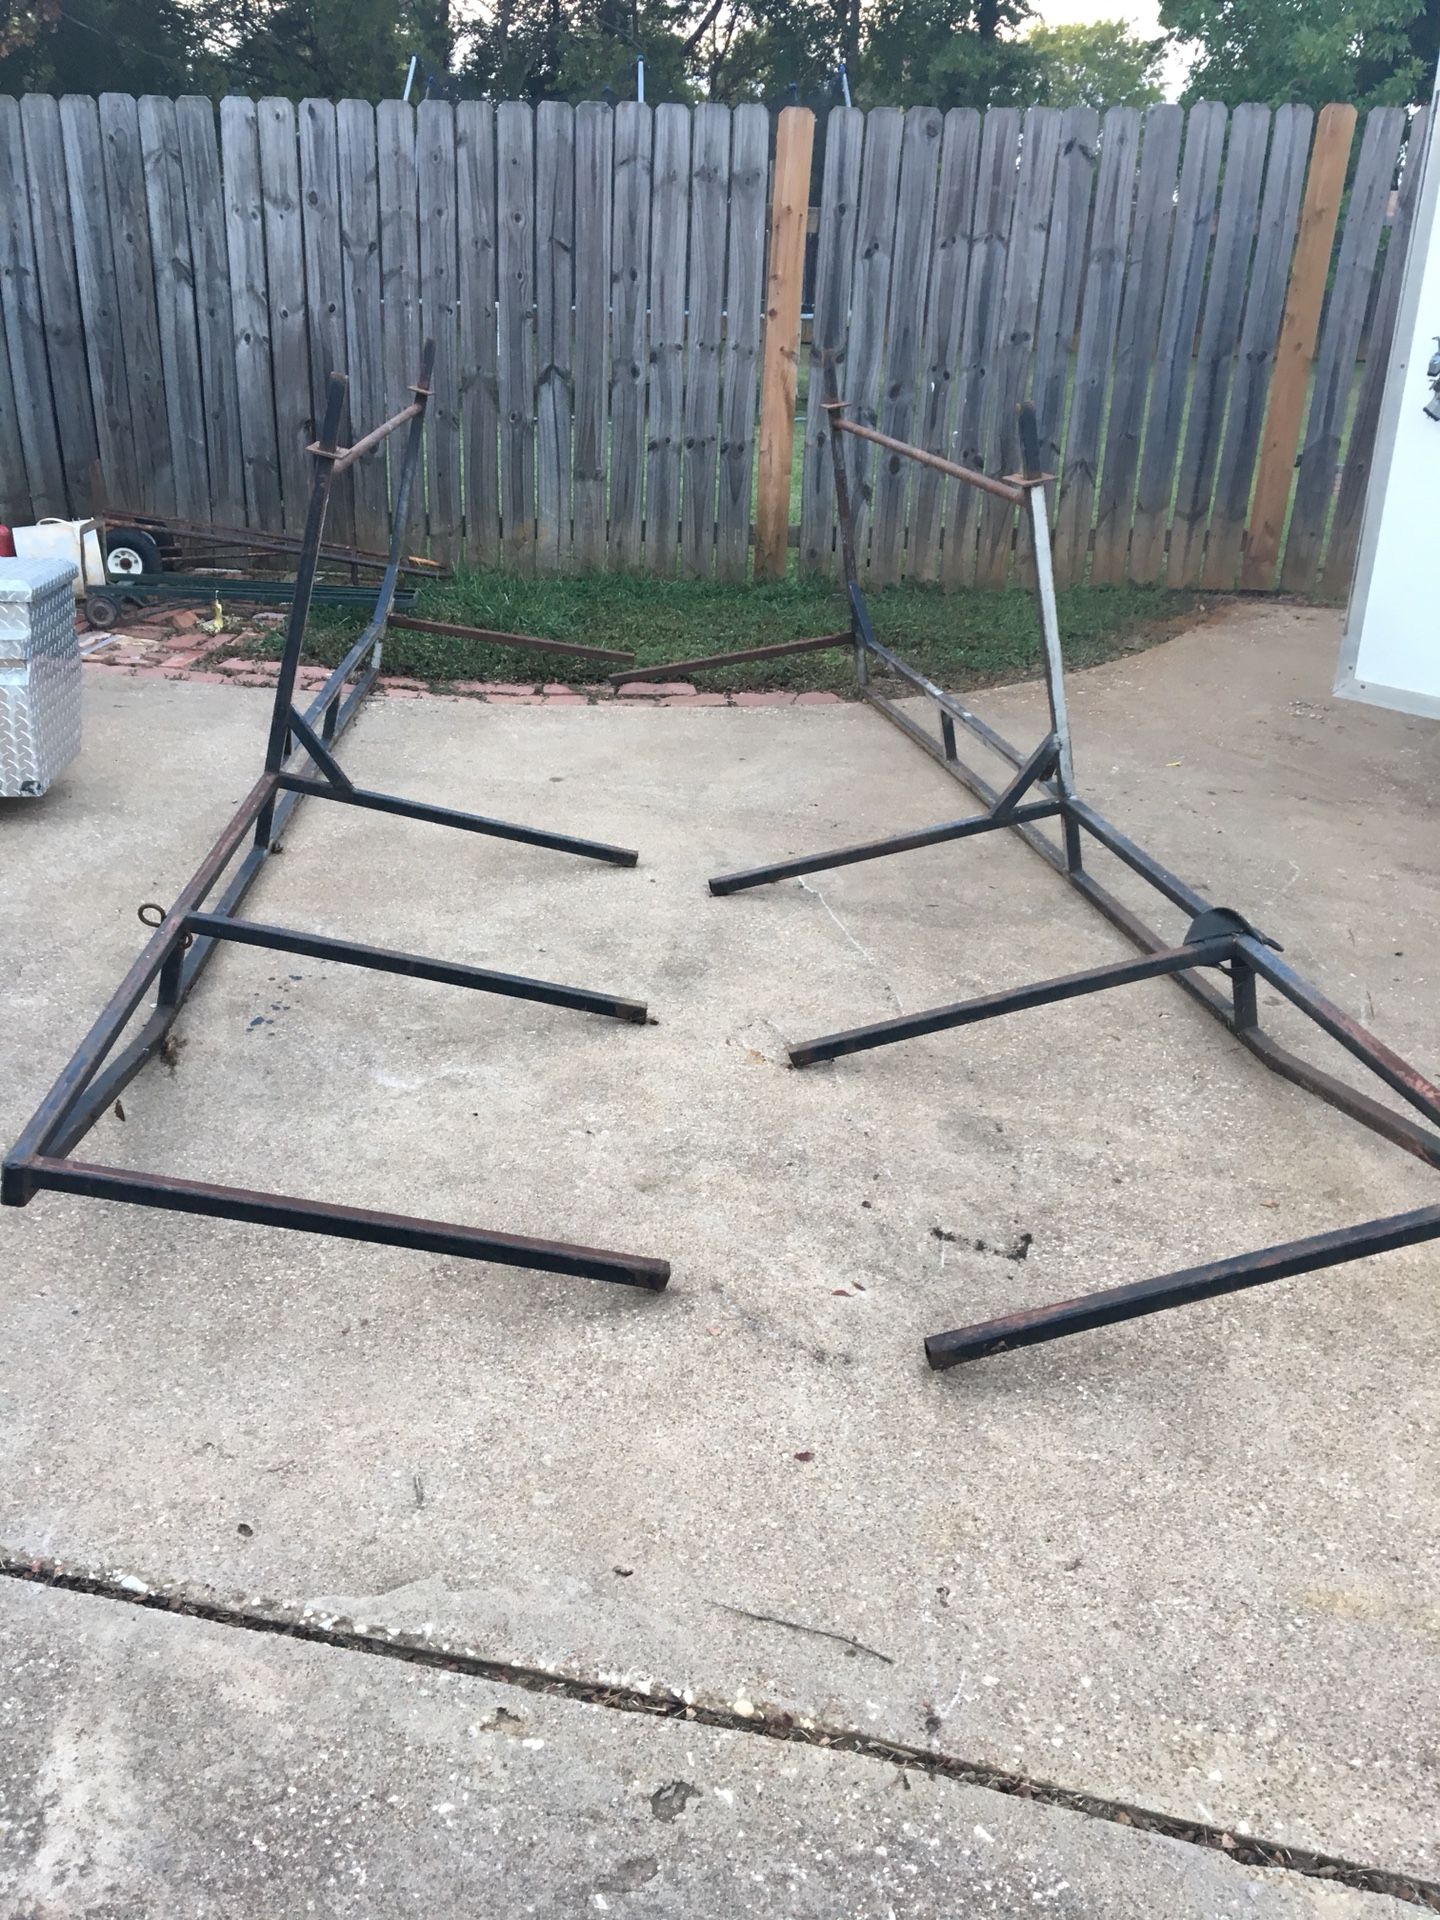 Photo Ladder rack 1 14 square tubing. I had it on a 2010 f150. You will need to weld together or sleeve the union and add pins.